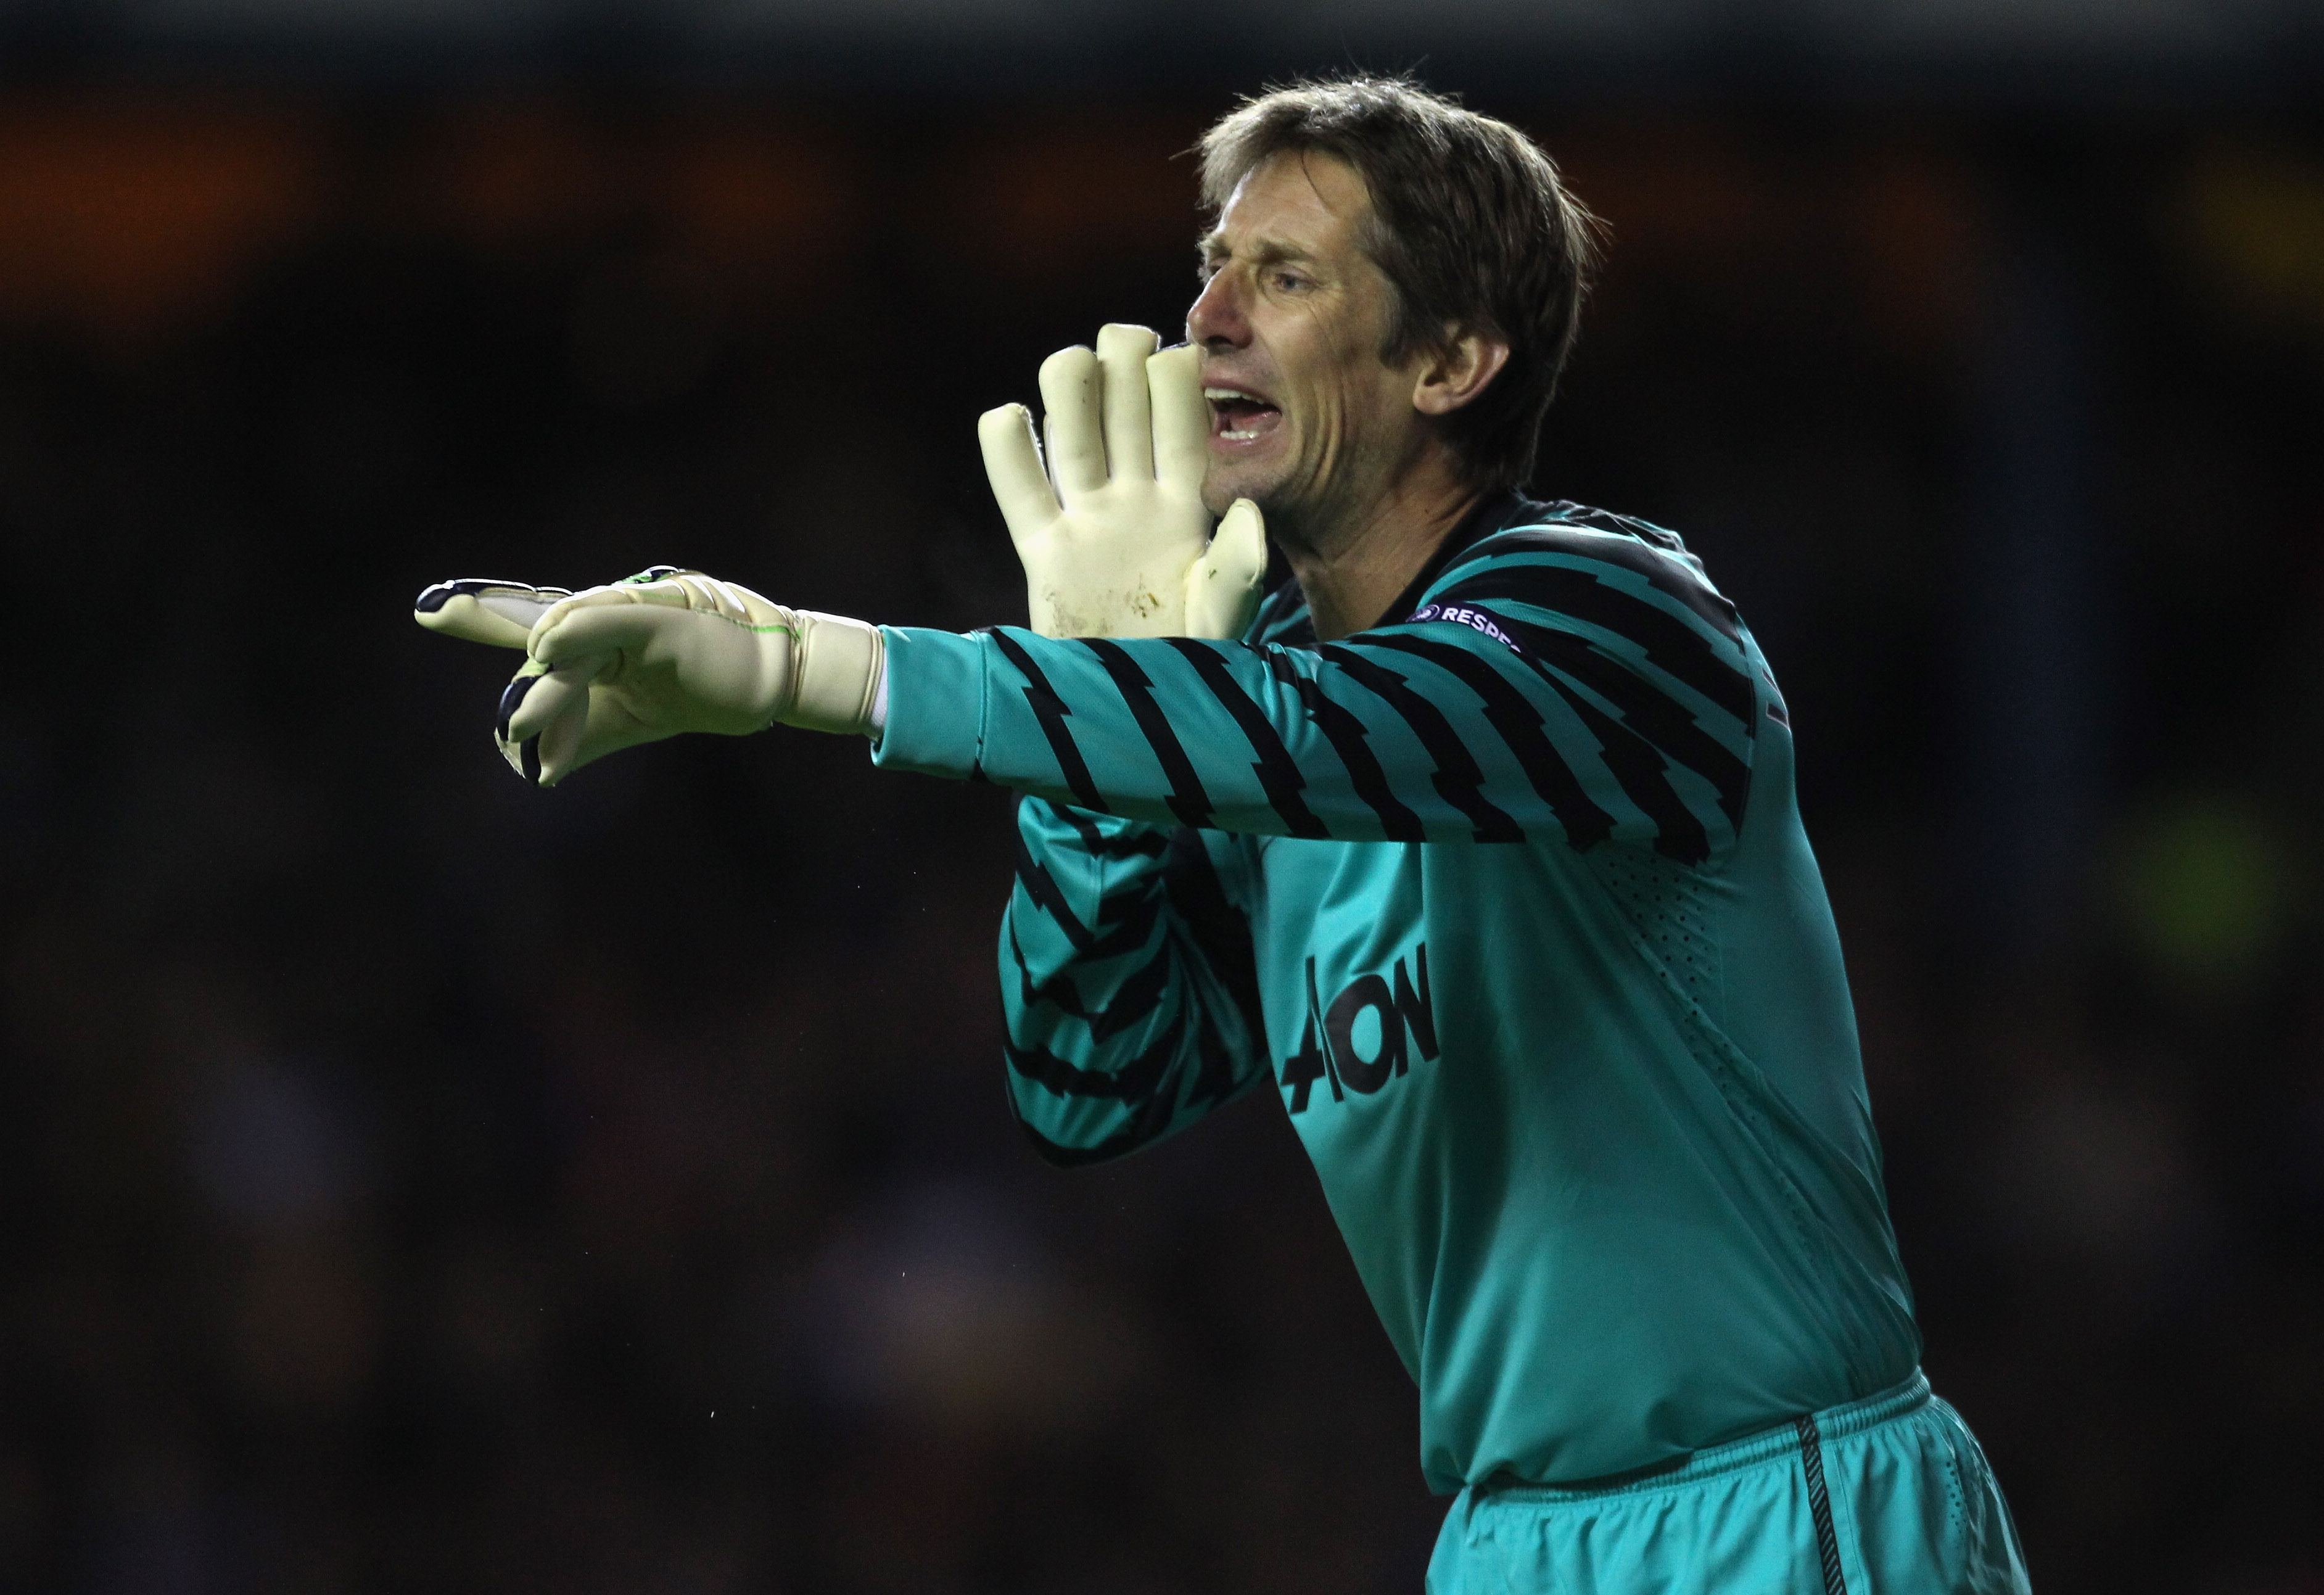 GLASGOW, SCOTLAND - NOVEMBER 24:  Edwin van der Sar of Manchester United during the UEFA Champions League Group C match between Glasgow Rangers and Manchester United at Ibrox on November 24, 2010 in Glasgow, Scotland.  (Photo by Alex Livesey/Getty Images)